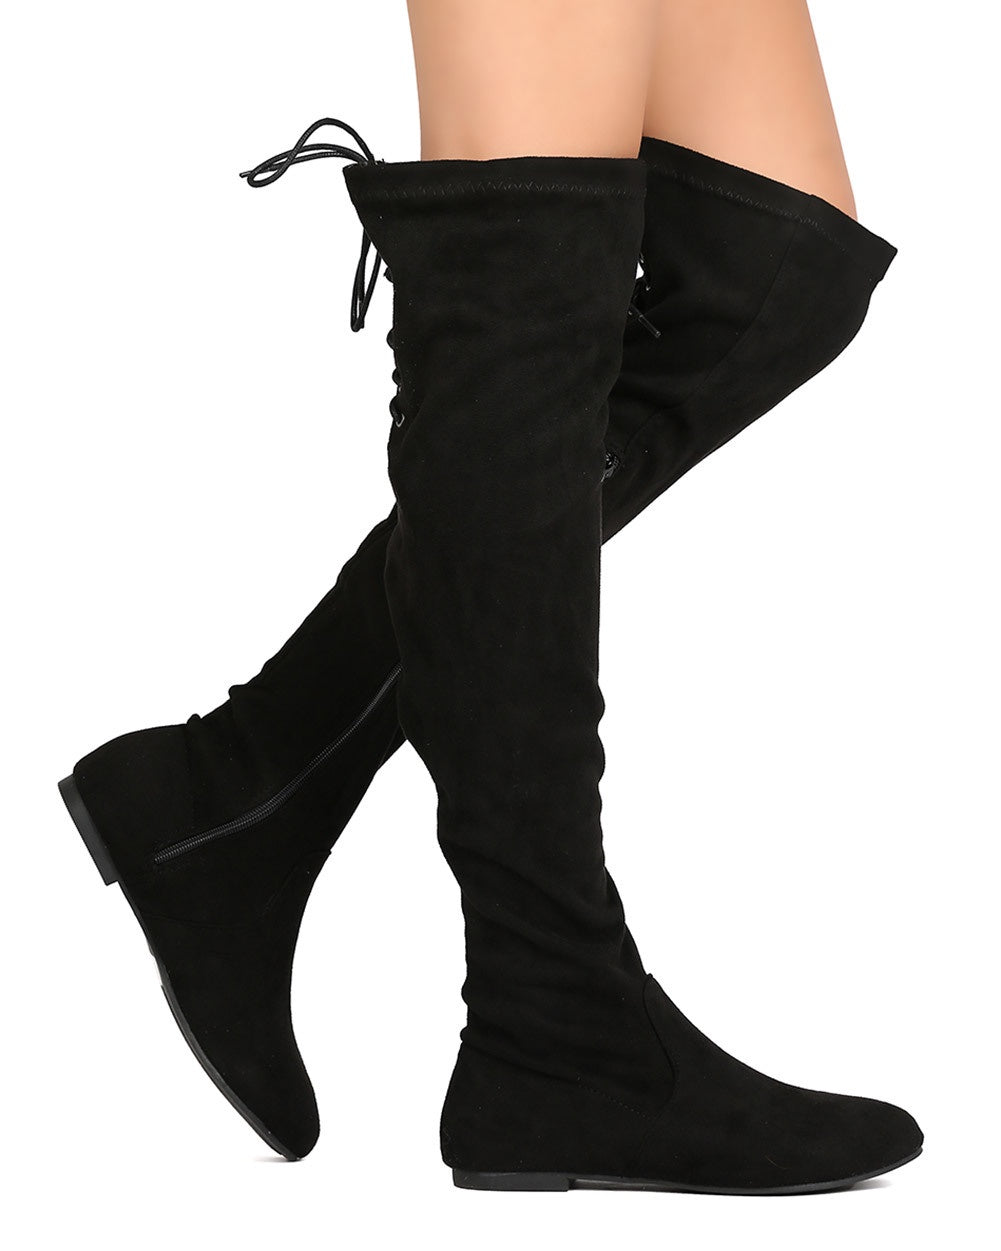 VICKIE-40 OK - black suede over the knee thigh high flat boots - ShoeTimeStores